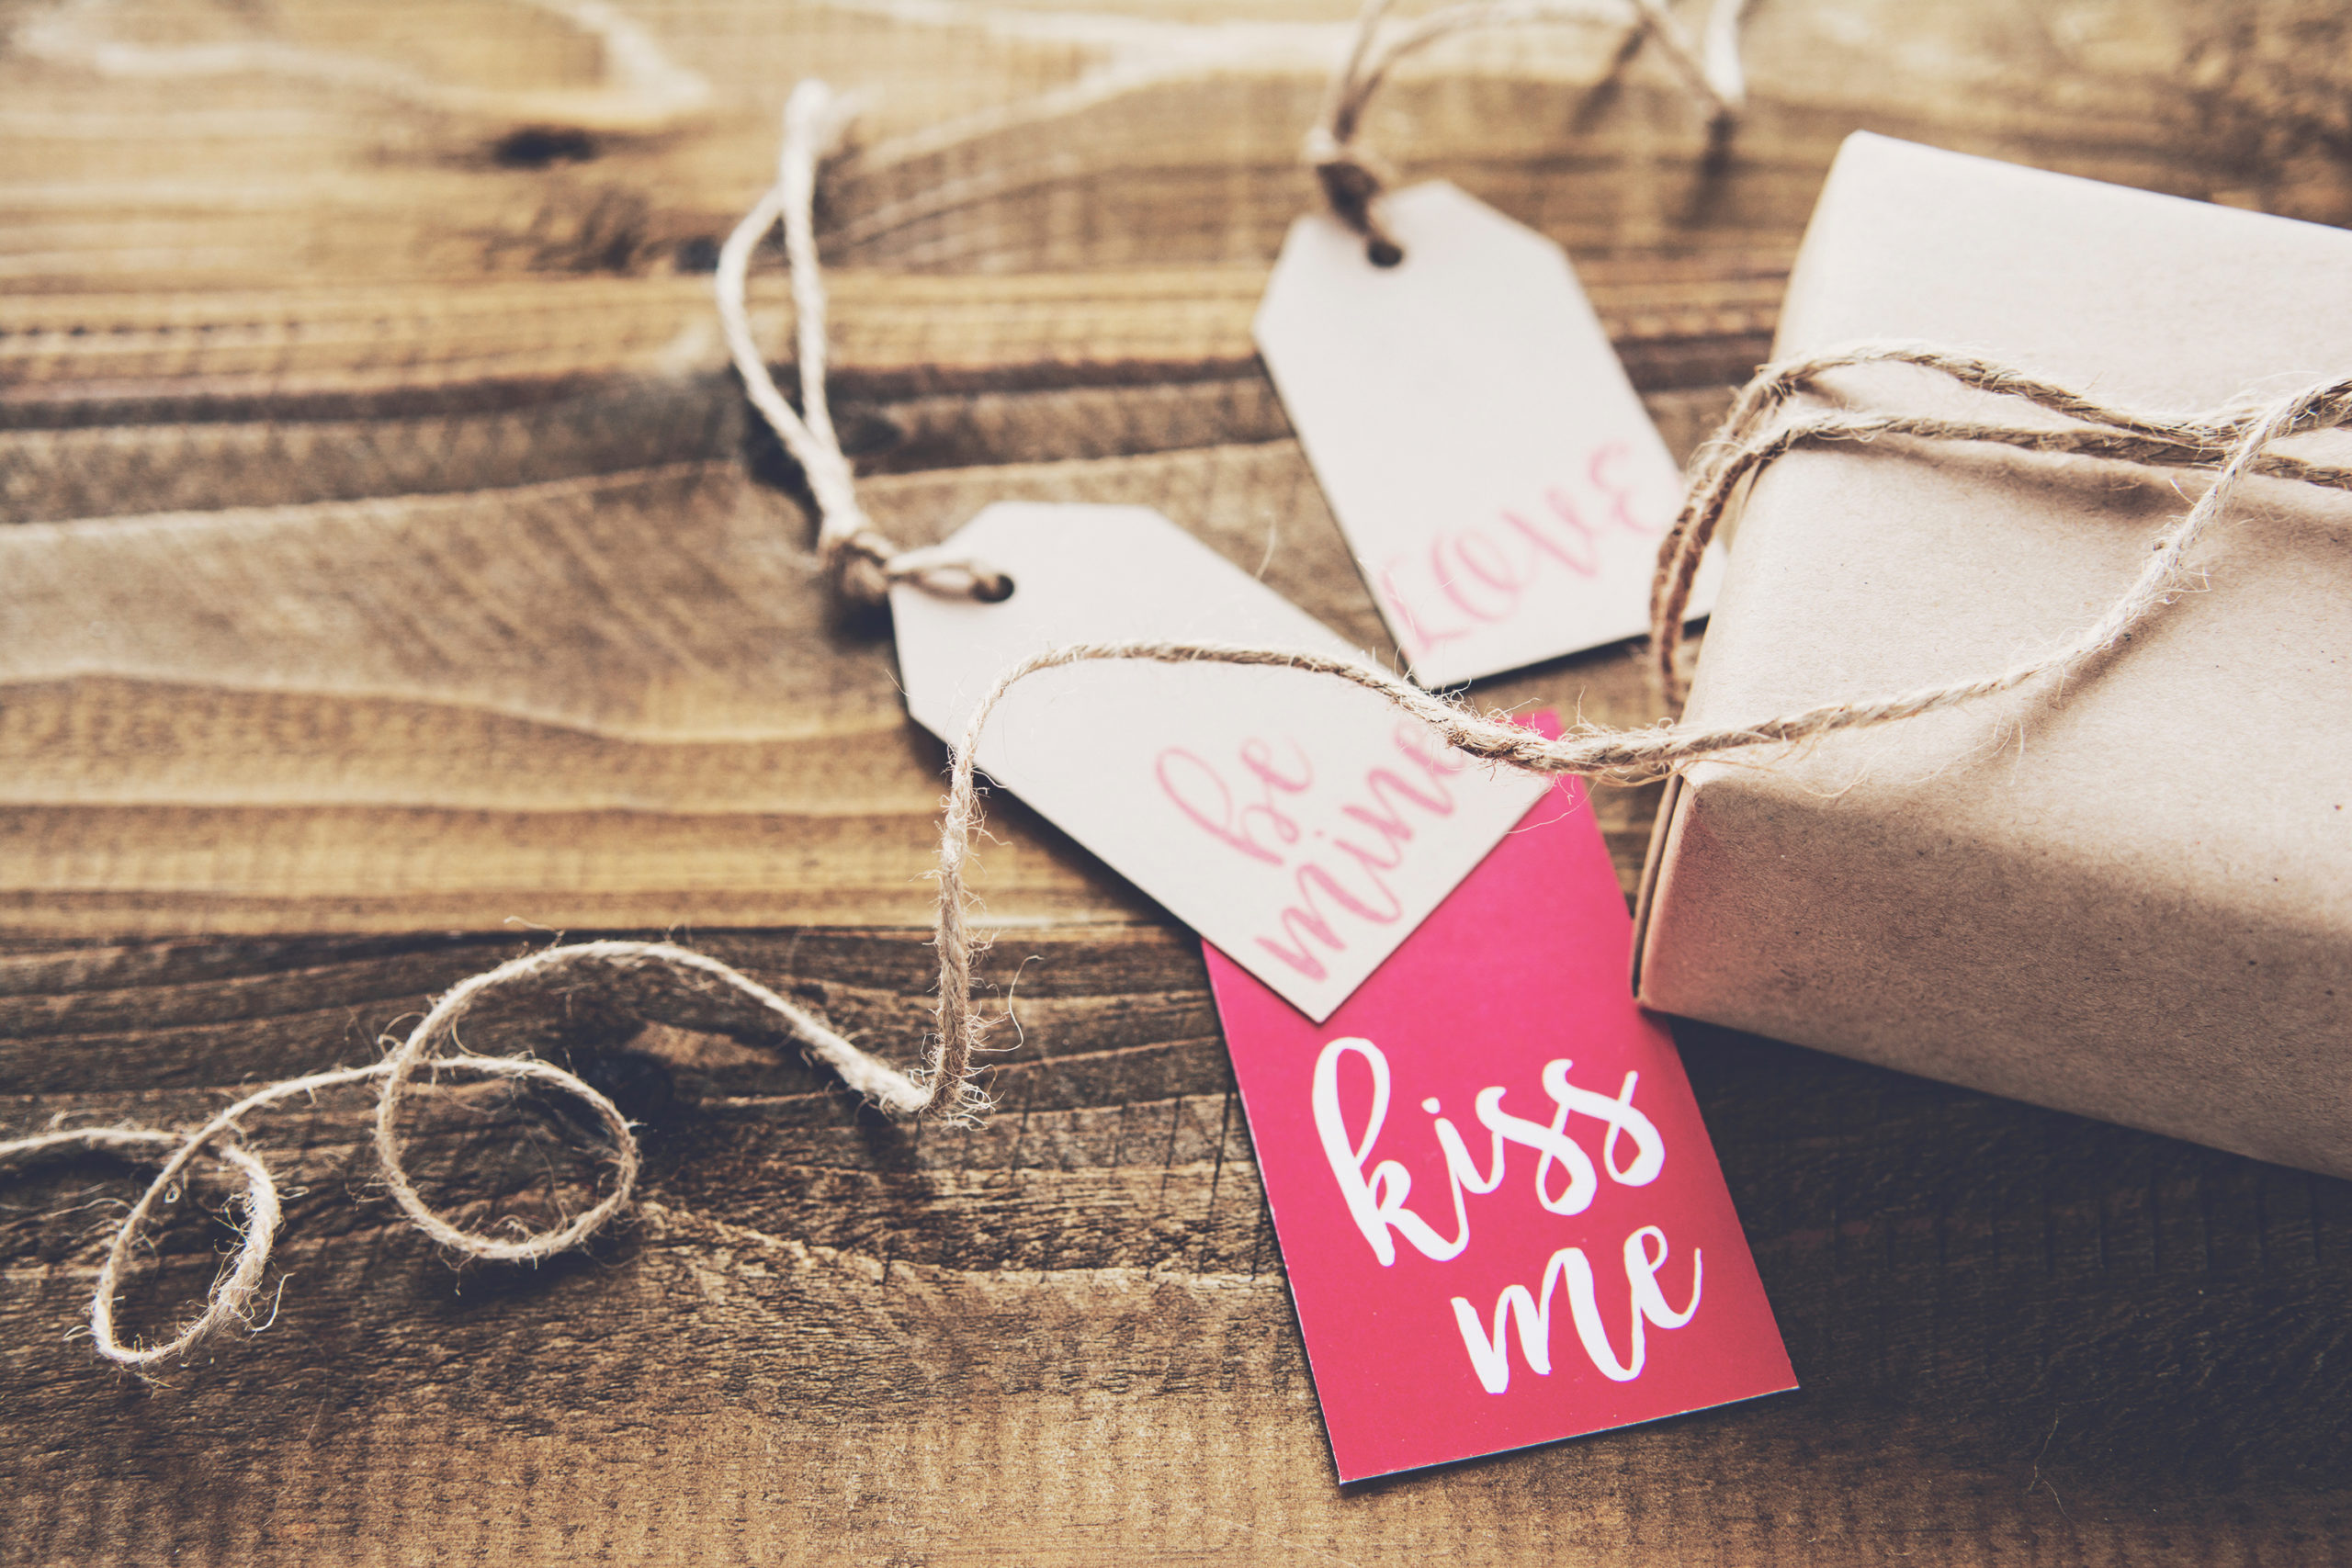 Make This Valentine's Day Extra Special with These One-of-a-Kind Gifts